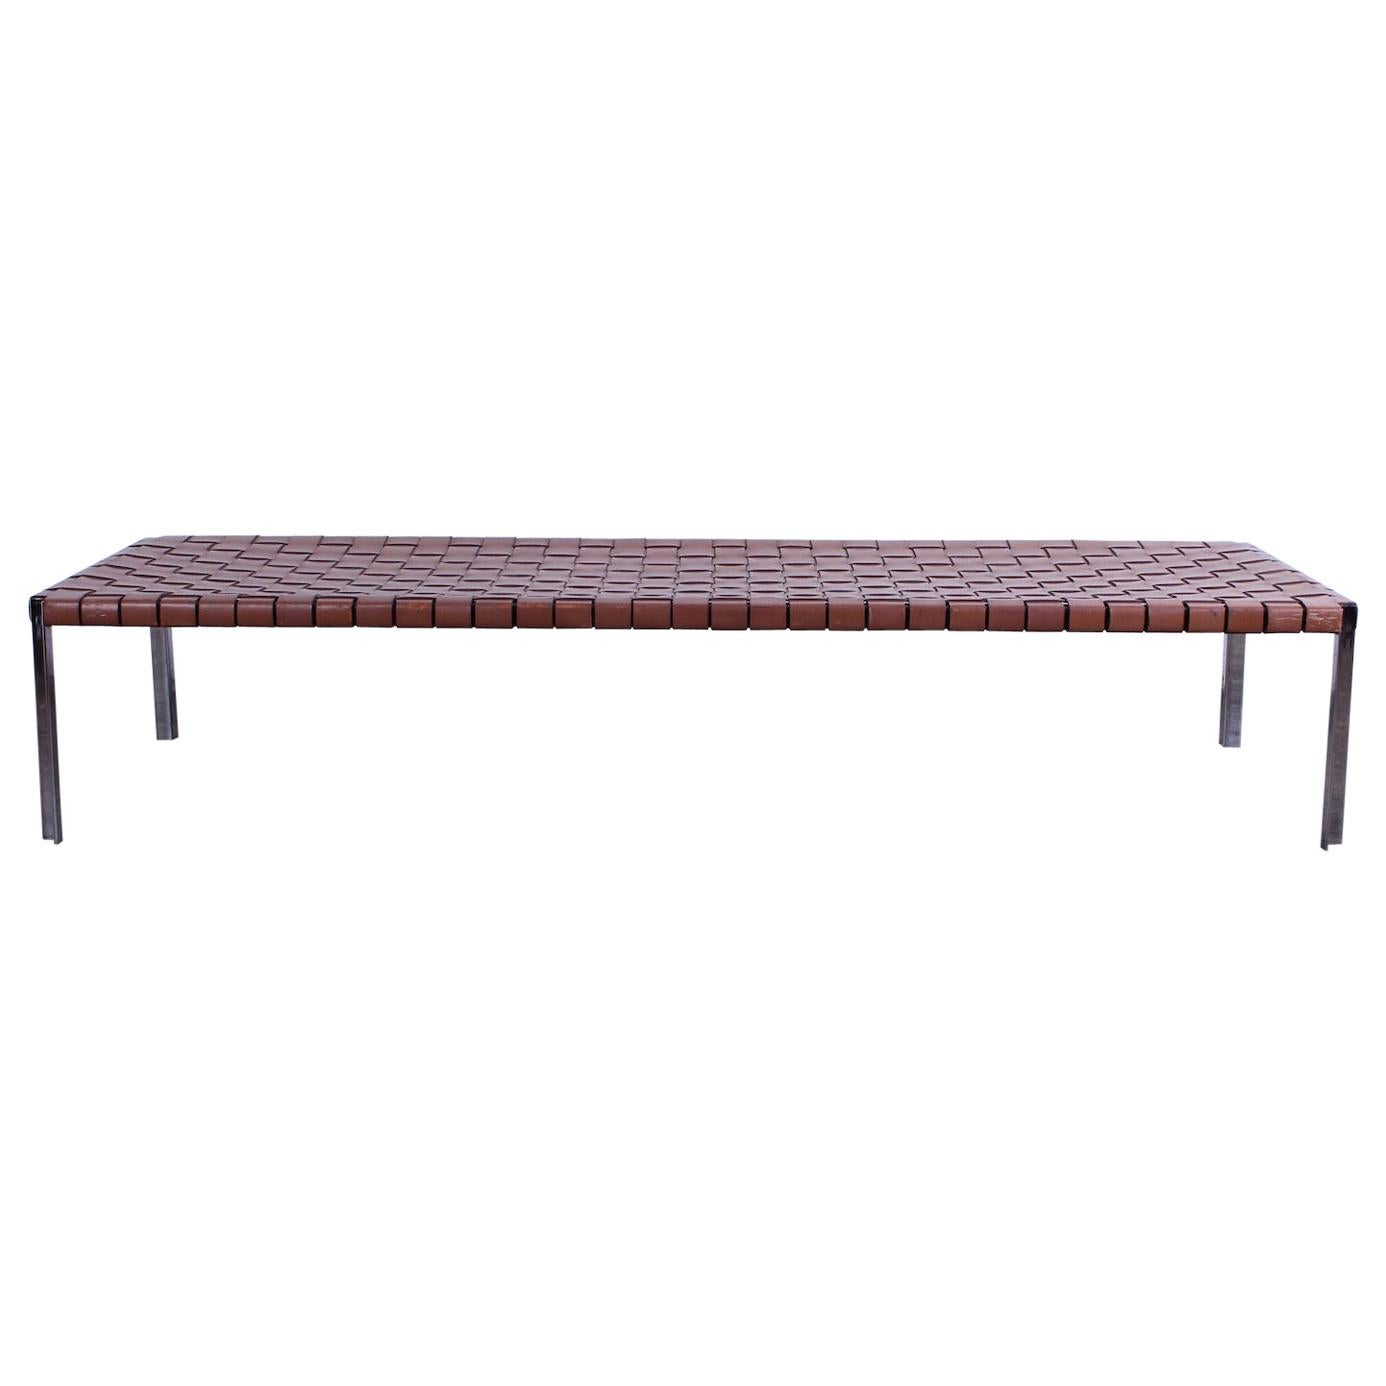 Woven Leather Bench by Estelle and Erwine Laverne